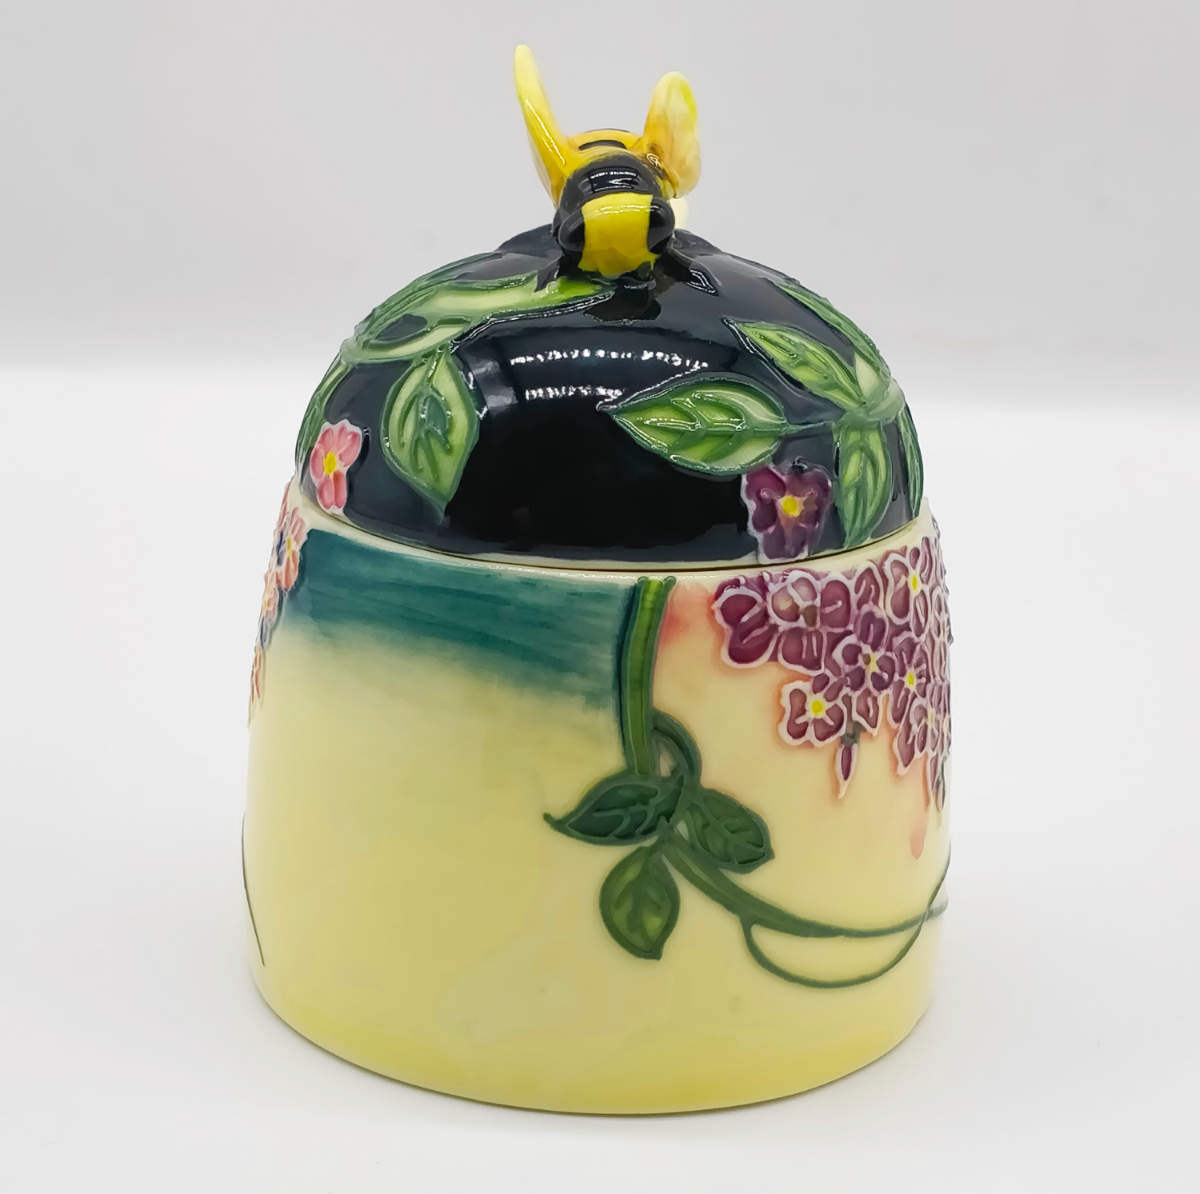 front view of the ceramic honey pot with dipper spoon by tupton ware